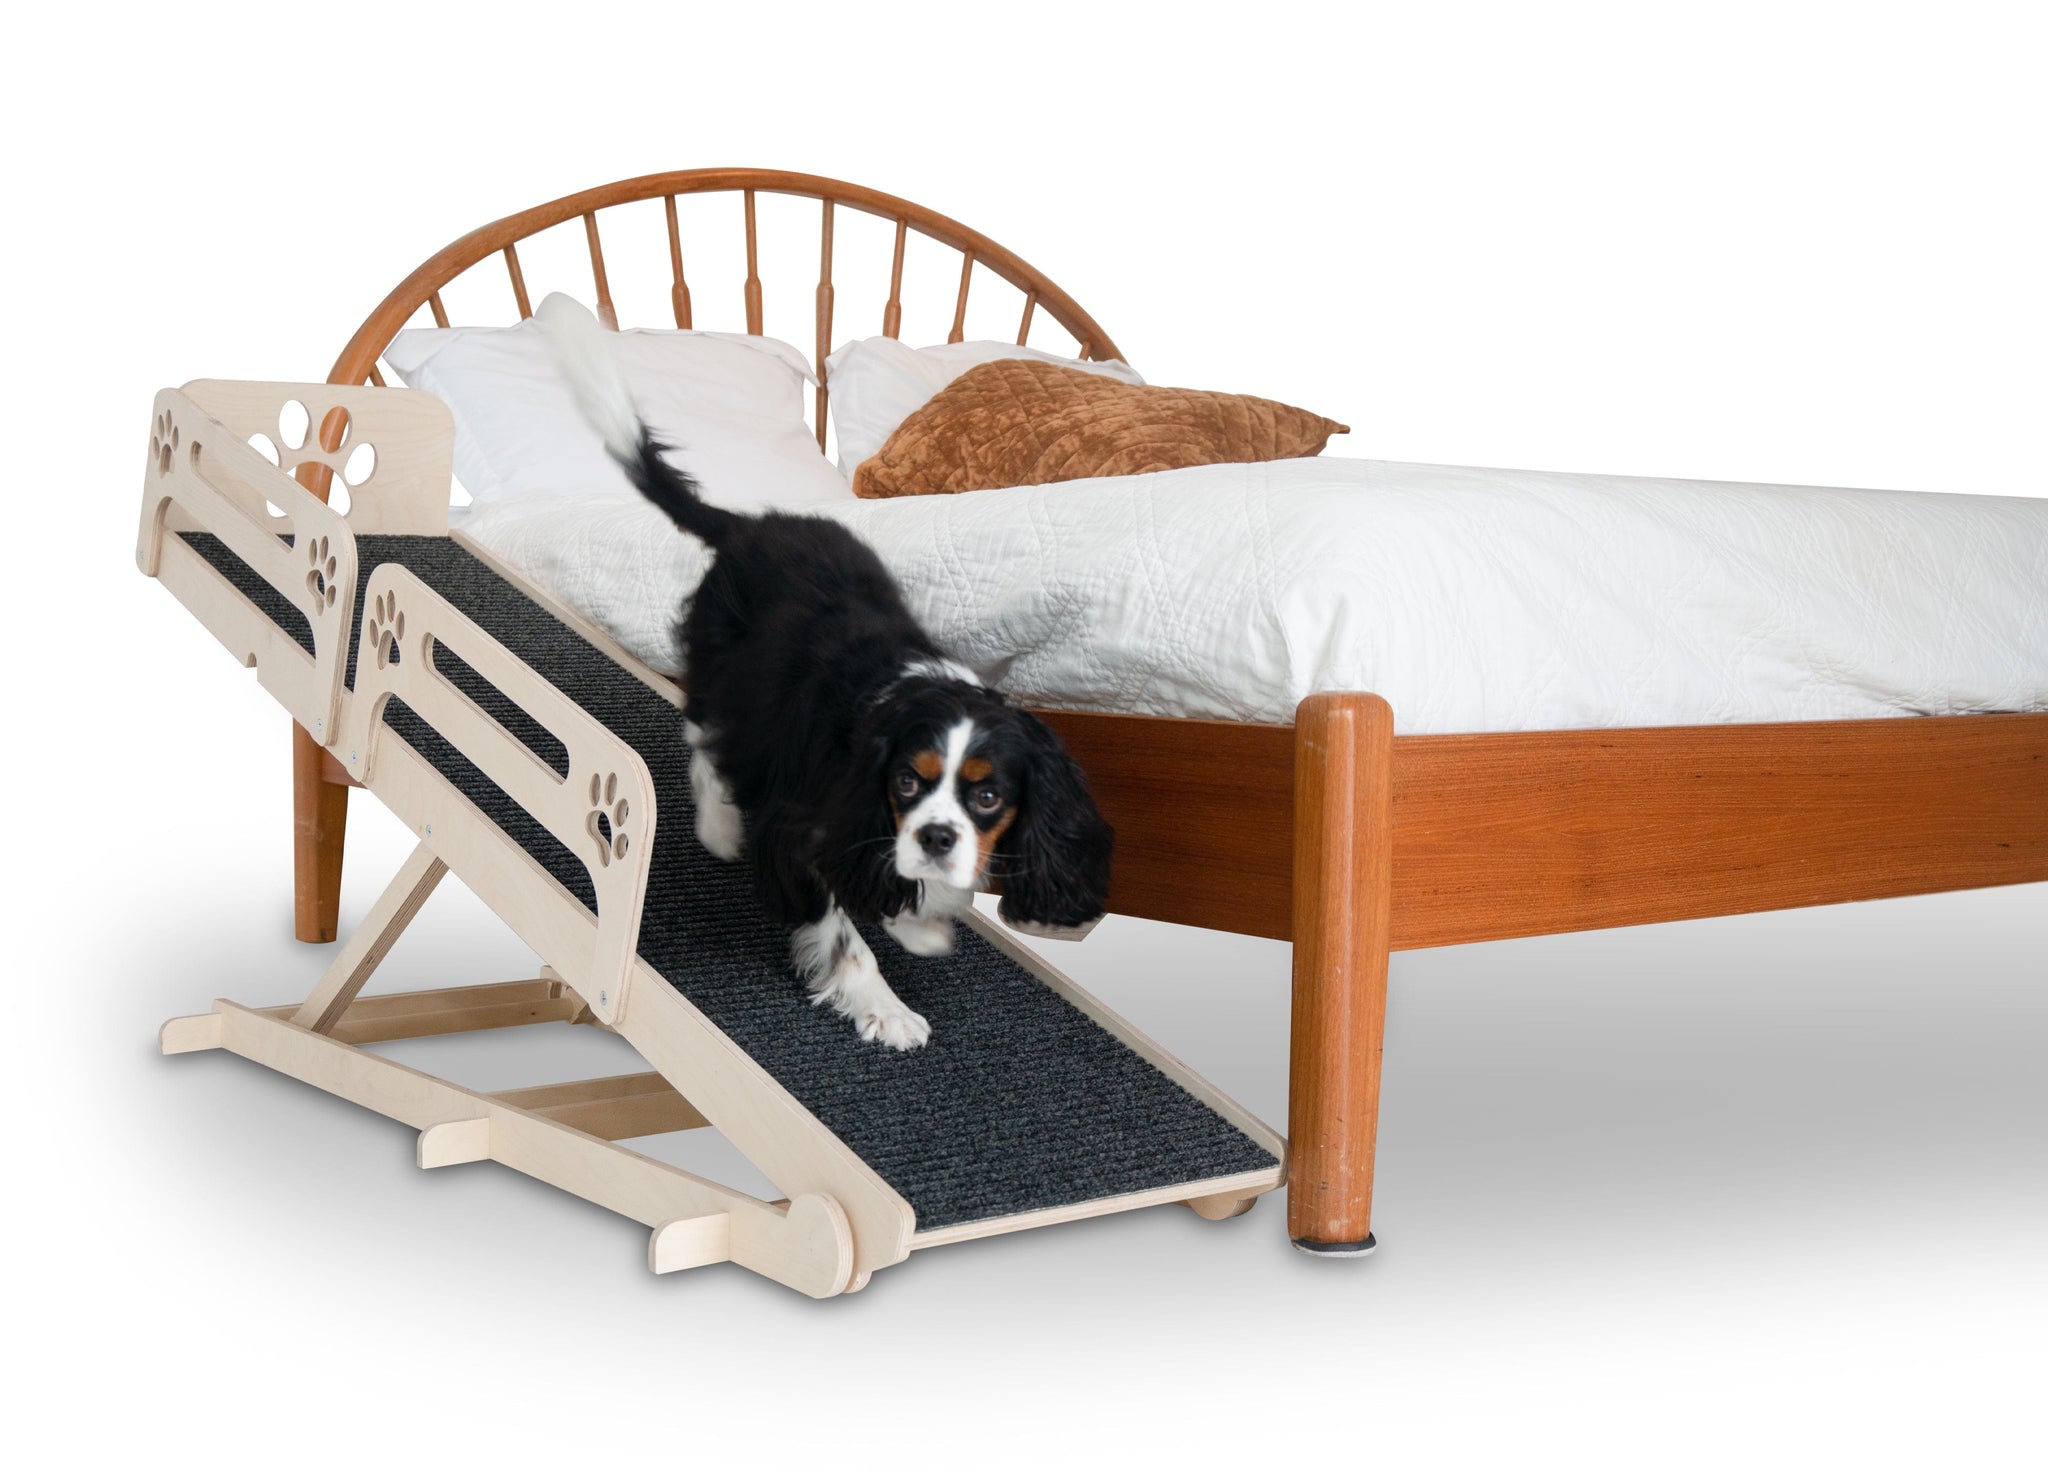 USA Made Dog Ramp For Bed - Adjustable from 14" to 37" Inches - Holds 150LBS -  For Small or Large Dogs